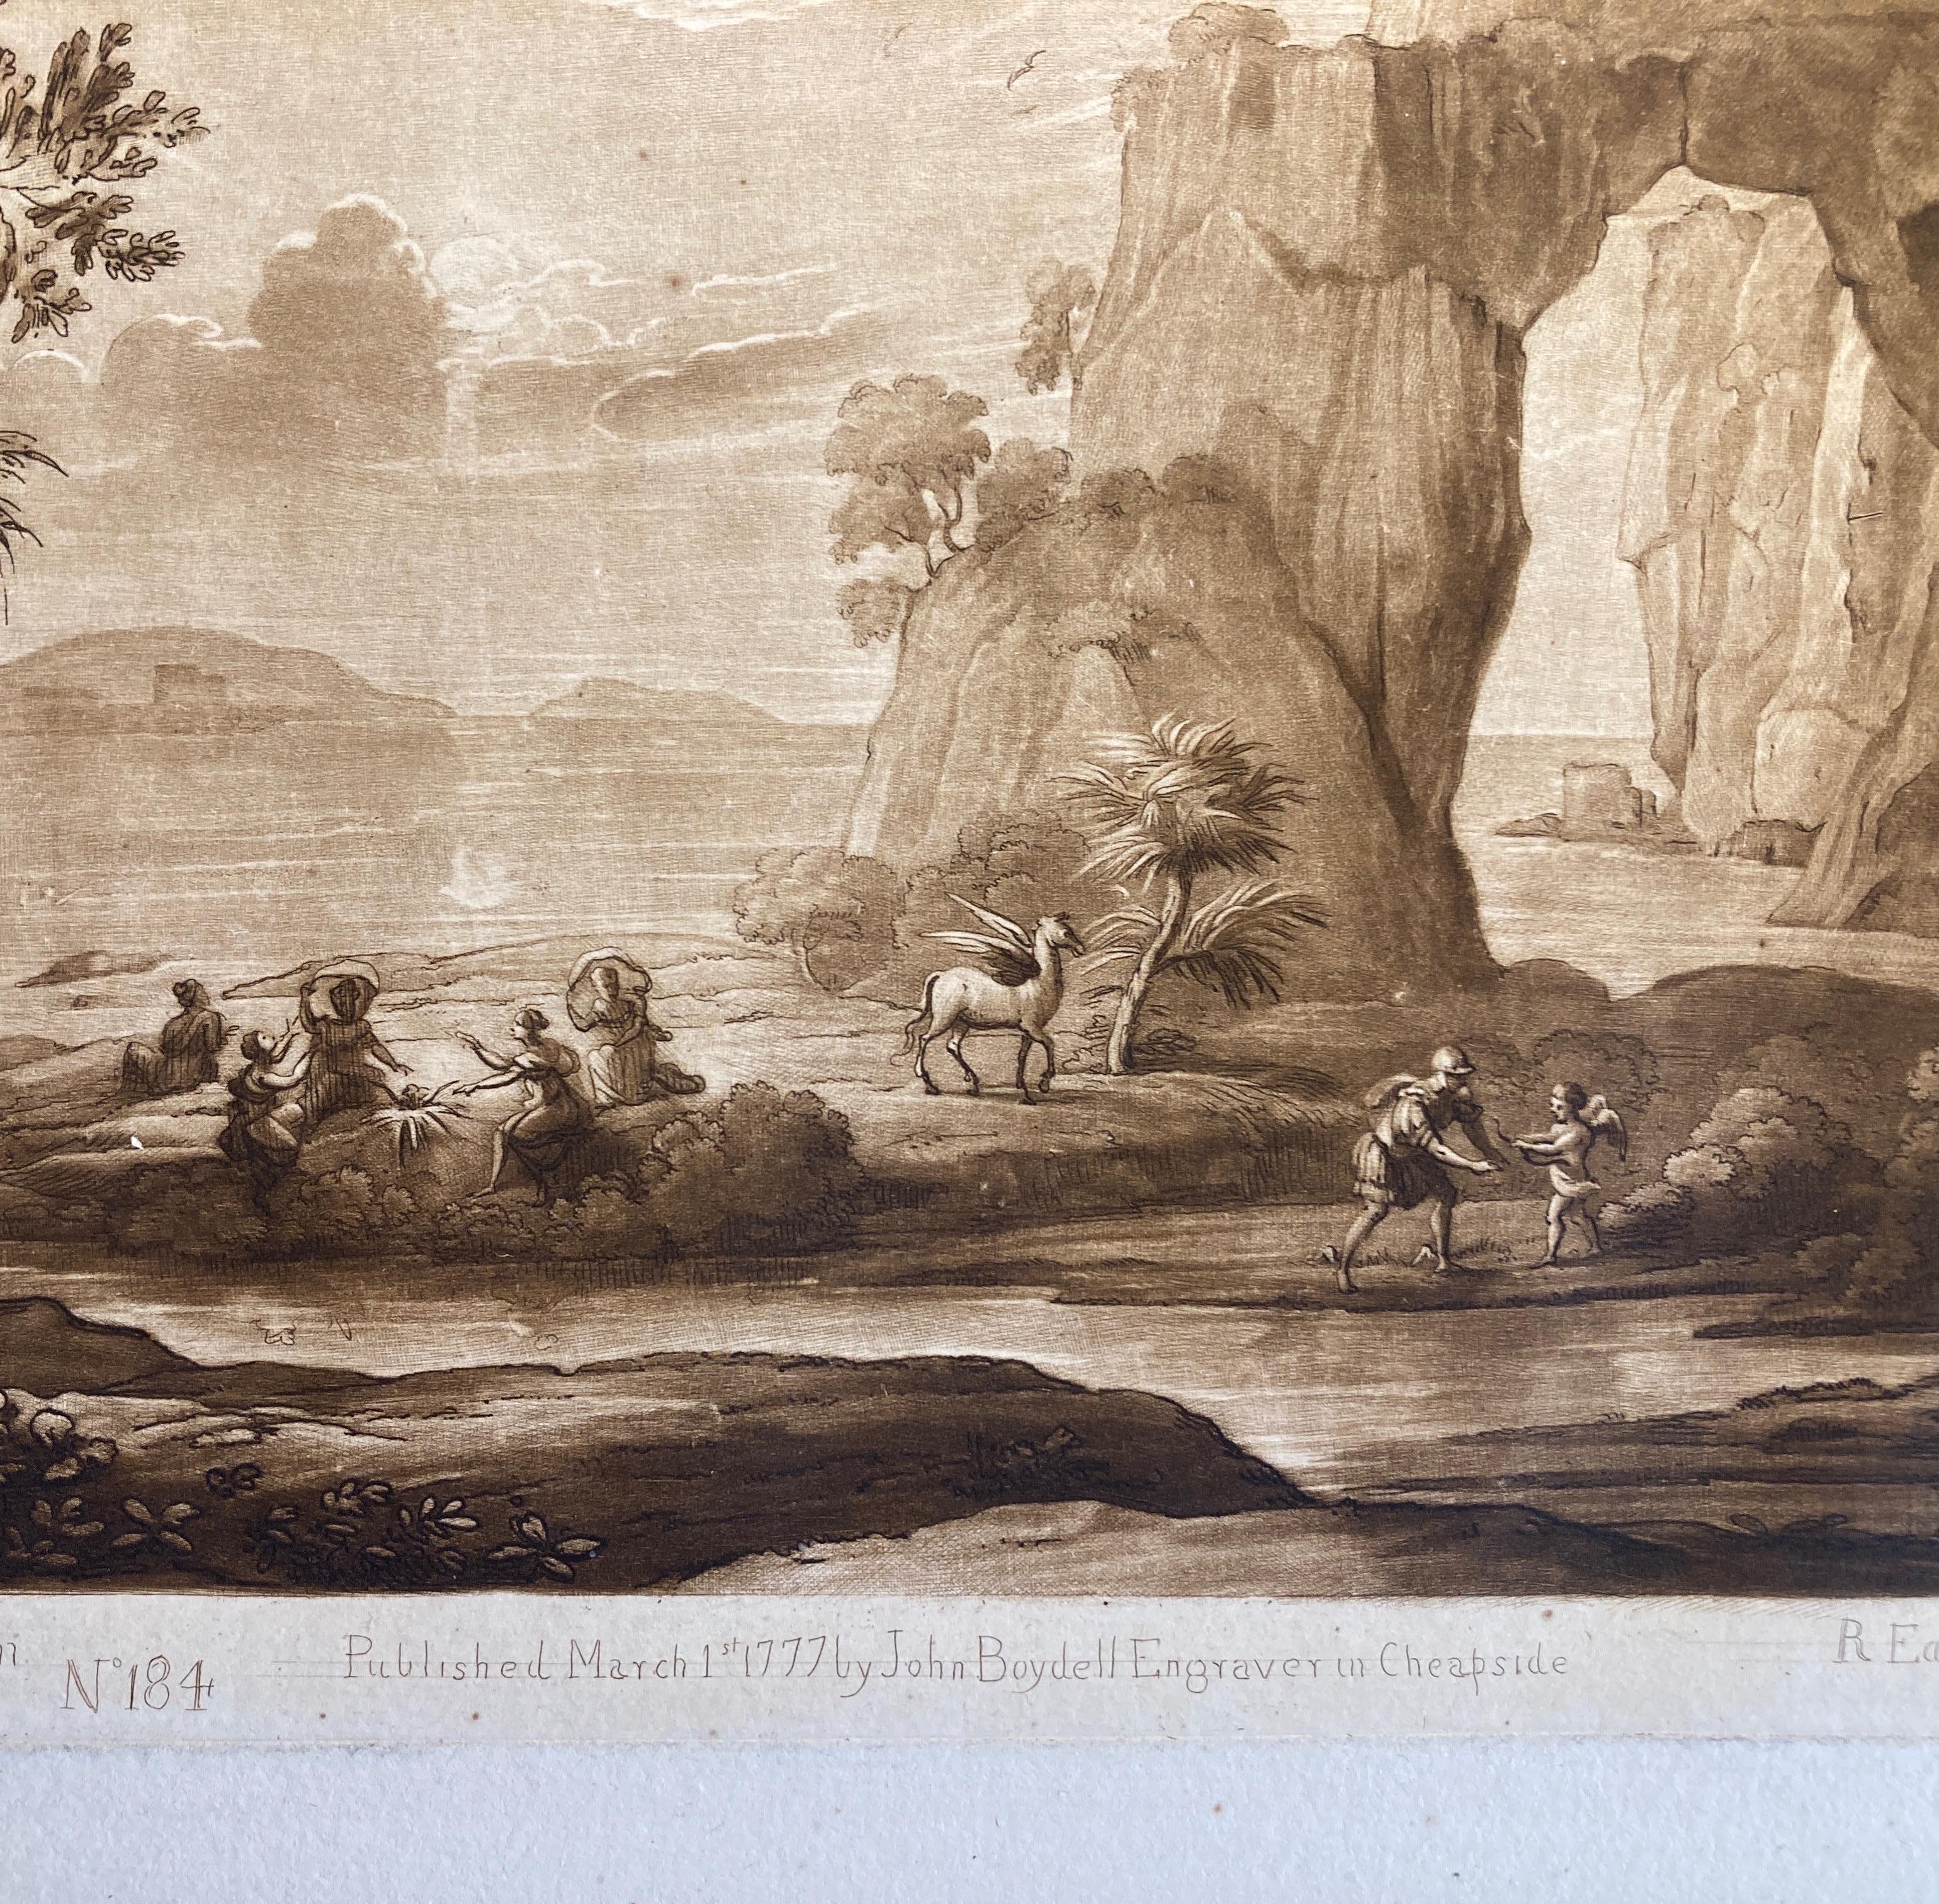 Claude Lorrain landscape with the God Hermes, Amor and the Muses. Richard Earlom aquatint c1817
by Lorrain, Claude le/Earlom, Richard

Countryside with goats and cattle, by Richard Earlom after Claude Lorrain.

Richard Earlom sepia-printed engraving